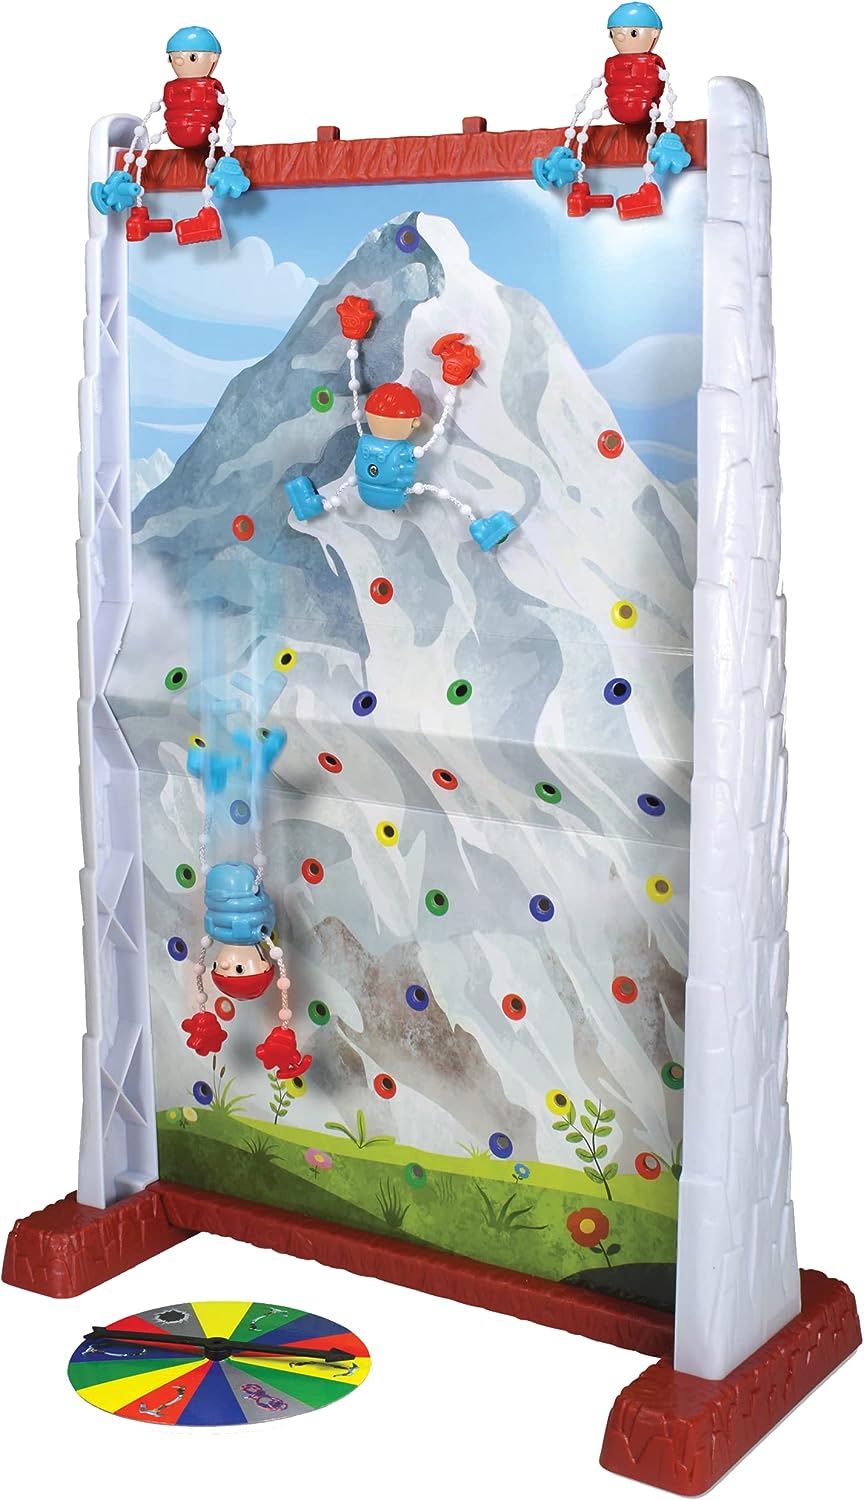 Get To The Peak - The Competitive Climbing Game, 2 Player, Race to the Top, Simple and Addictive Family Fun